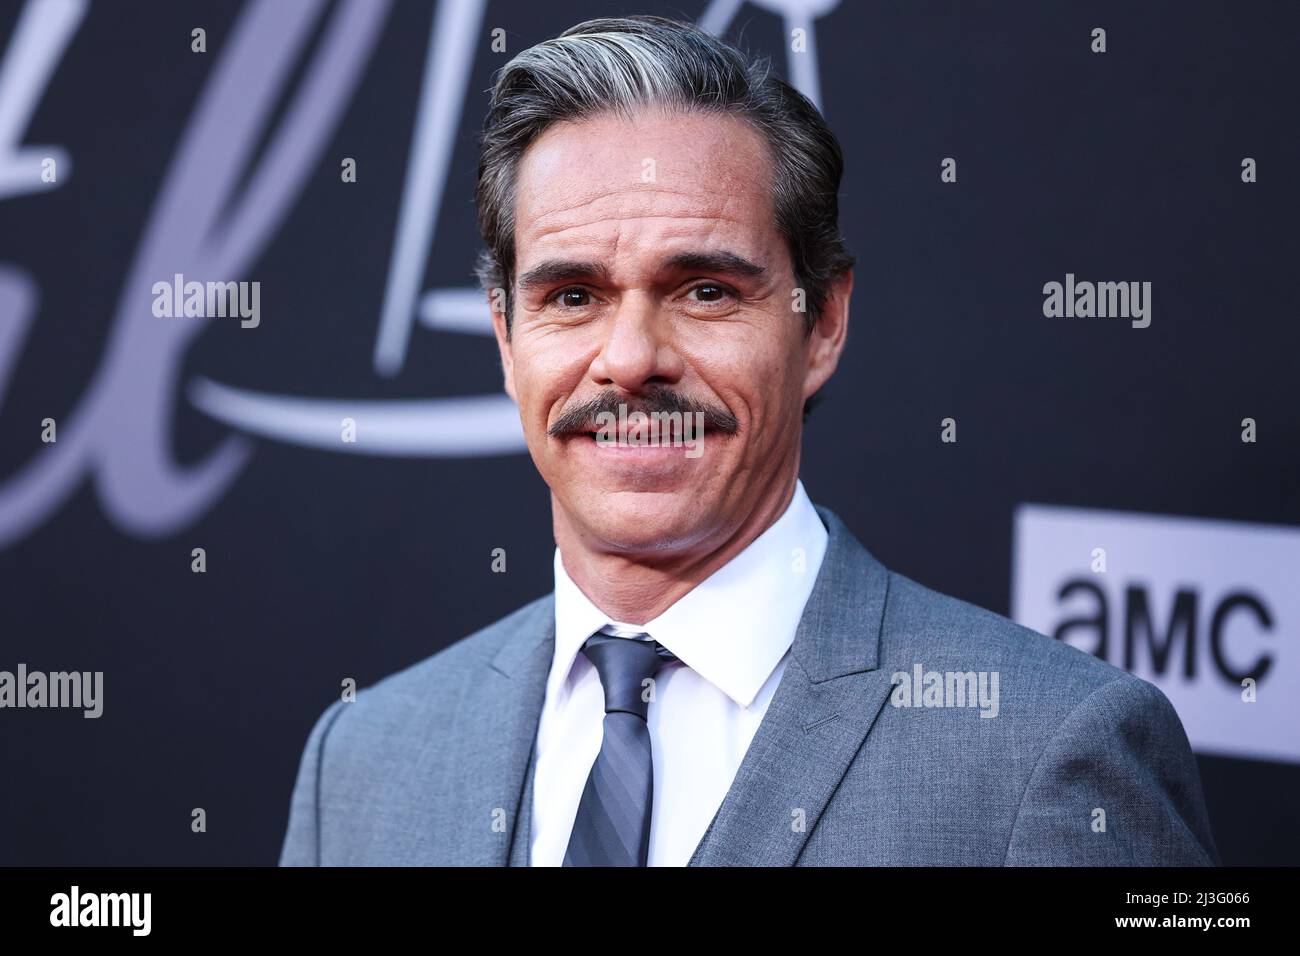 Hollywood, United States. 07th Apr, 2022. HOLLYWOOD, LOS ANGELES, CALIFORNIA, USA - APRIL 07: Tony Dalton arrives at the Los Angeles Premiere Of AMC's 'Better Call Saul' Season 6 held at the Hollywood American Legion Theatre Post 43 on April 7, 2022 in Hollywood, Los Angeles, California, United States. (Photo by Xavier Collin/Image Press Agency) Credit: Image Press Agency/Alamy Live News Stock Photo